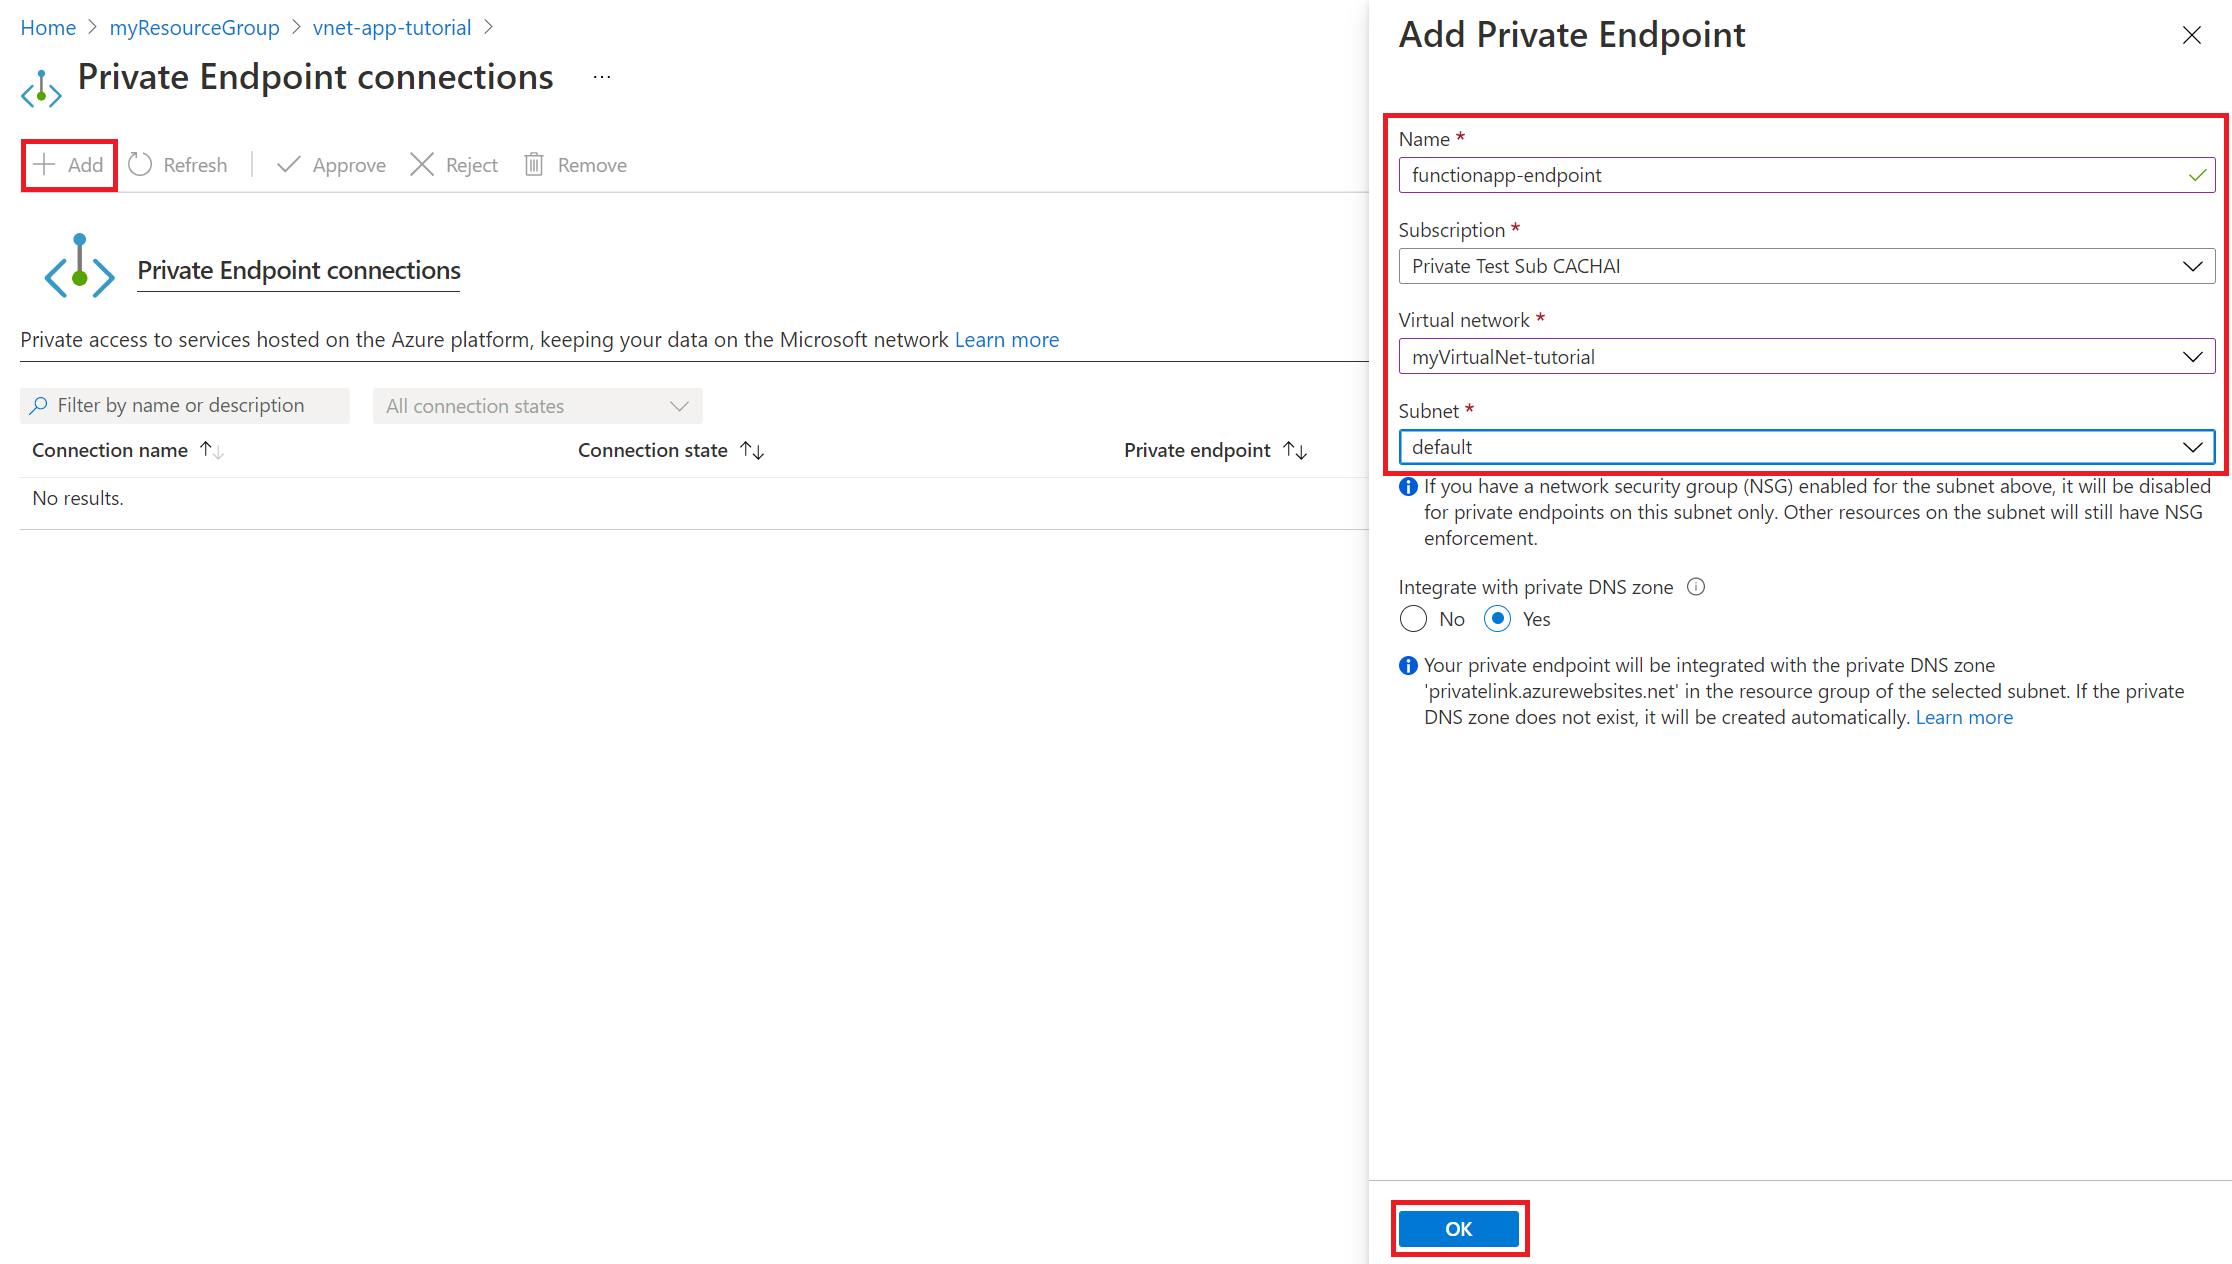 Screenshot of how to create a function app private endpoint. The name is functionapp-endpoint. The subscription is 'Private Test Sub CACHHAI'. The virtual network is MyVirtualNet-tutorial. The subnet is default.